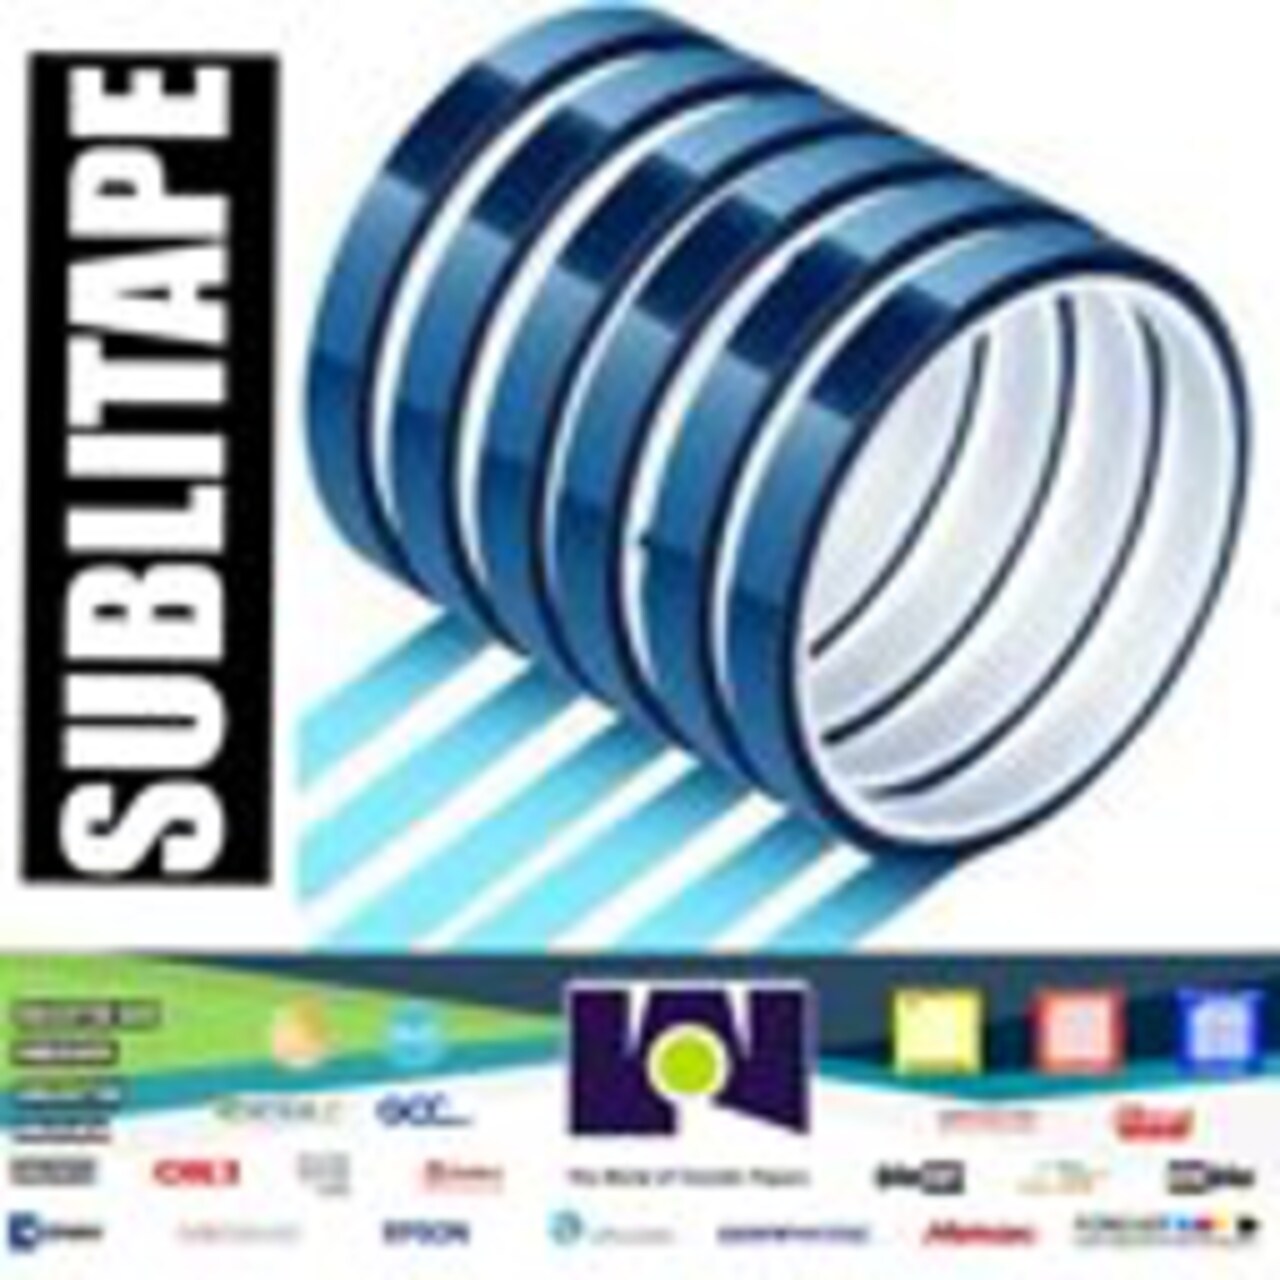 6 Rolls Heat Resistant Tapes Sublimation Press Transfer Thermal Tape  10mm*30m SUBLITAPE BLUE